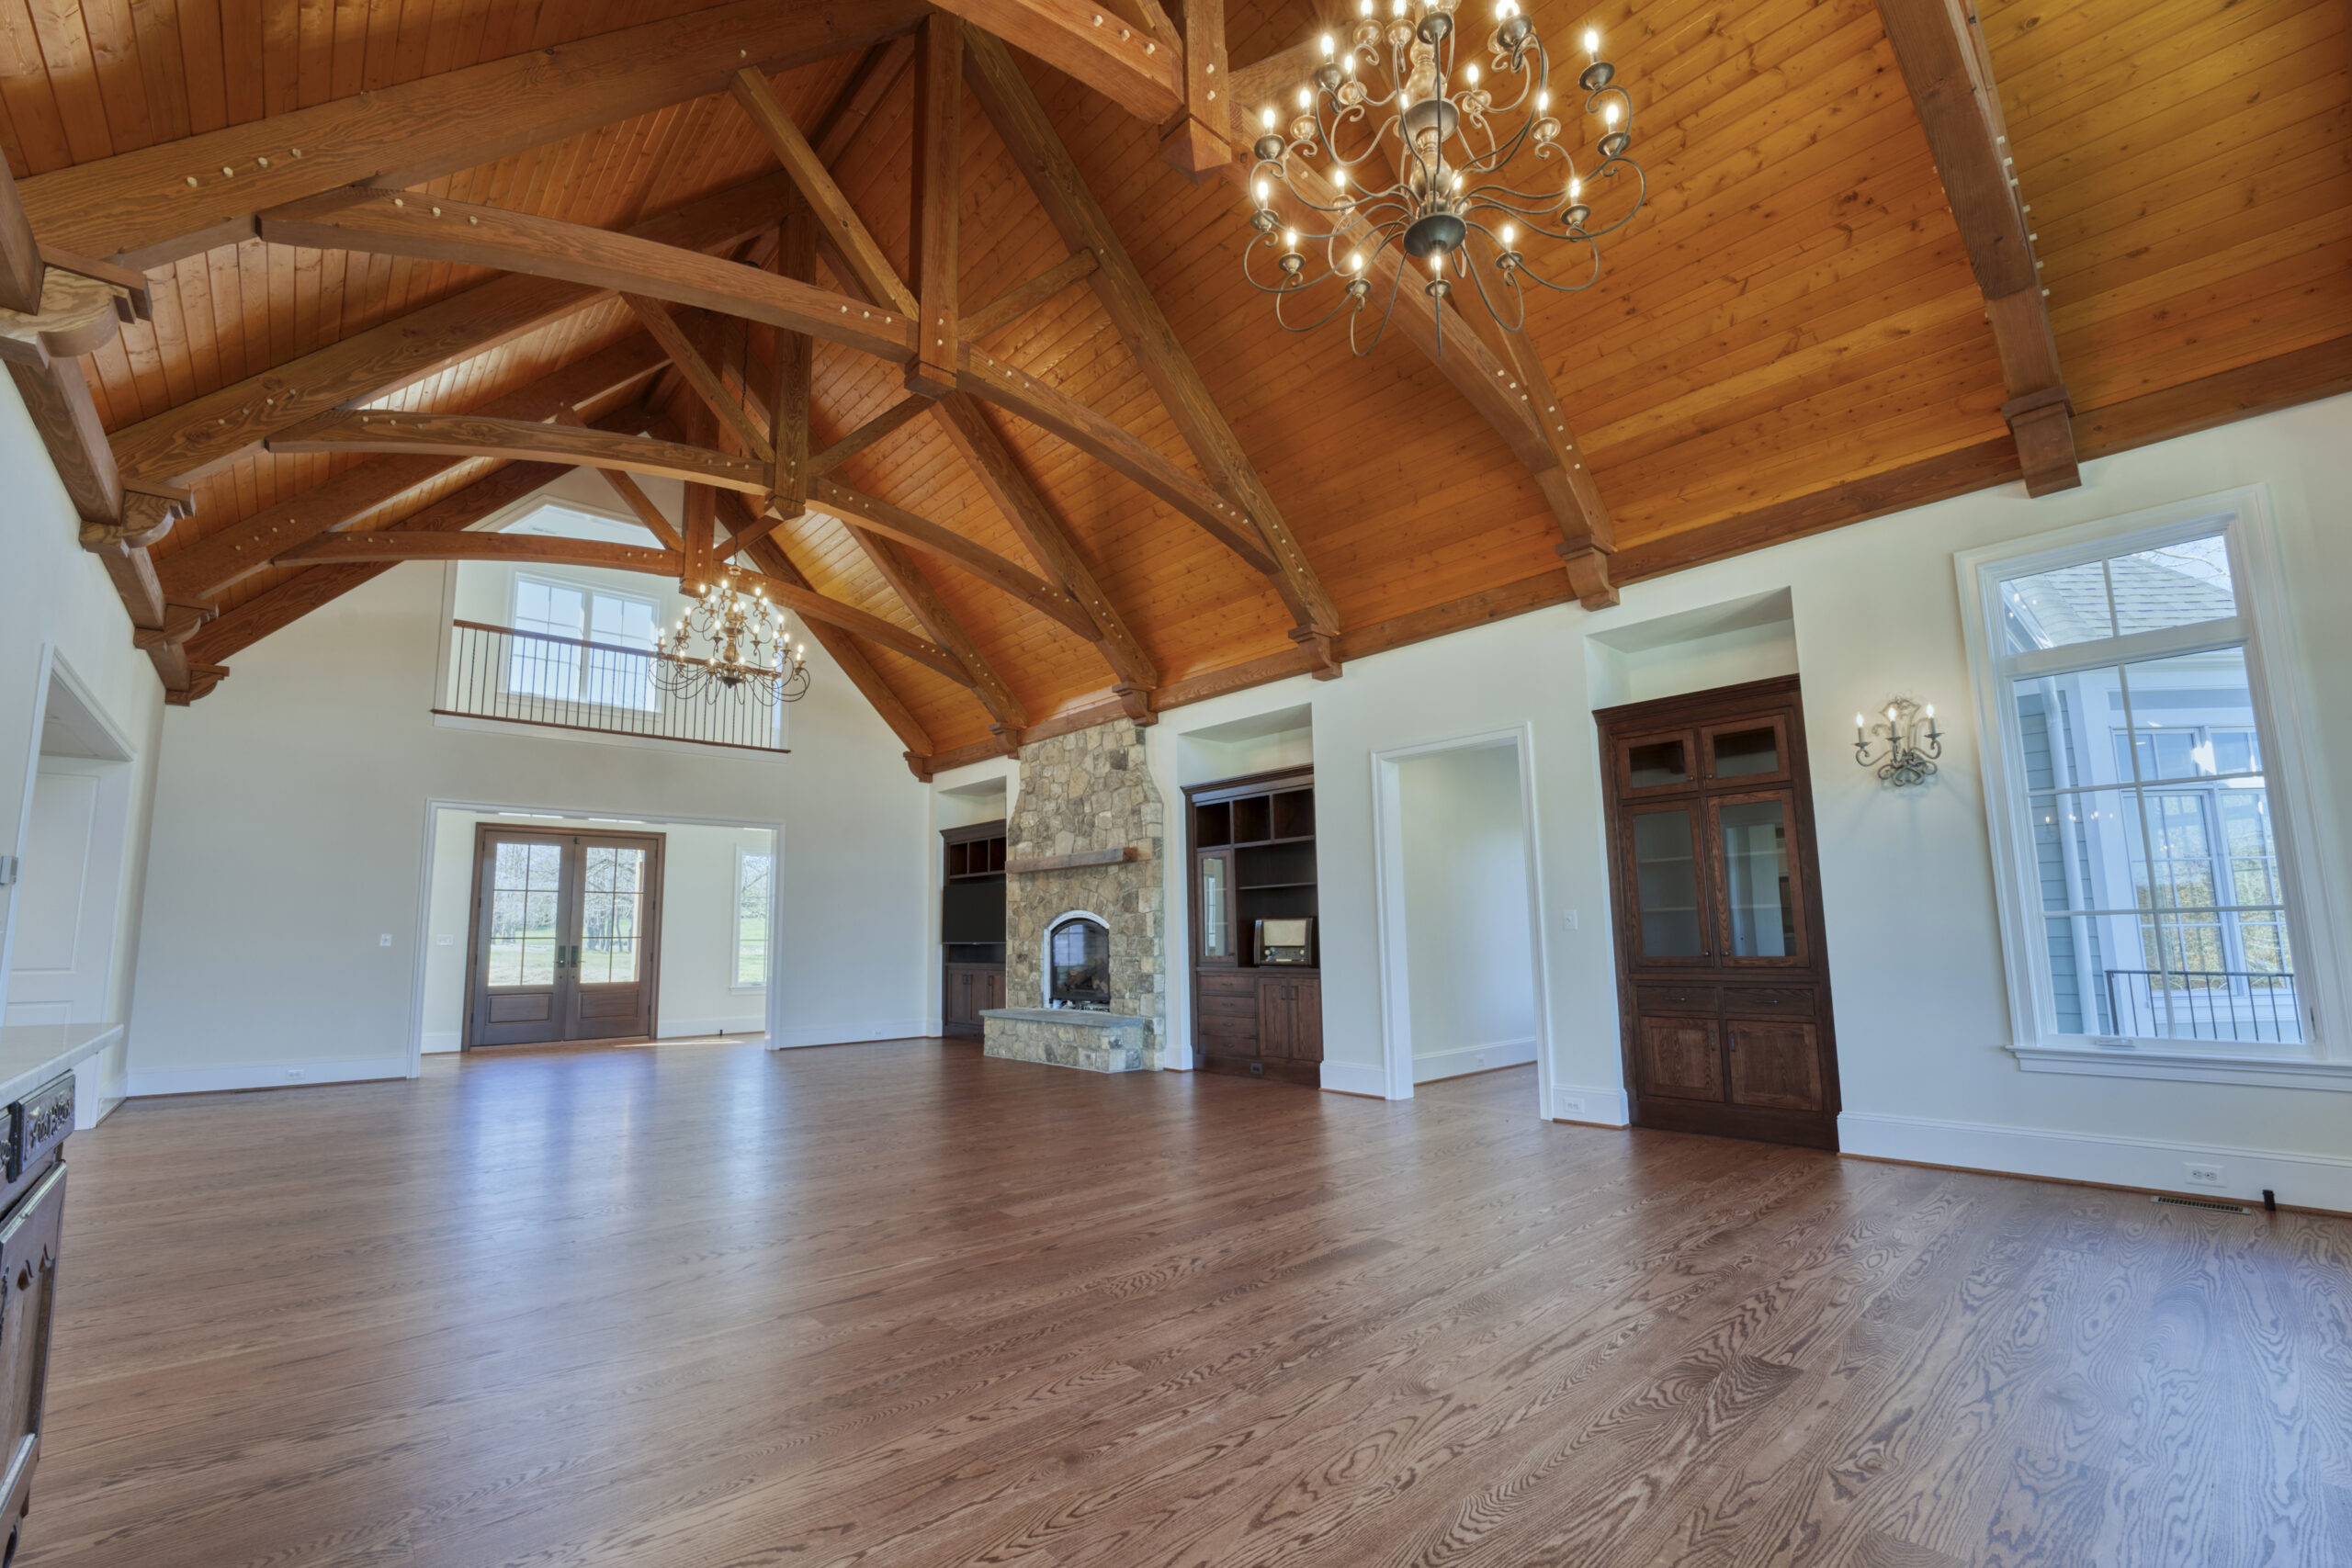 Professional interior photo of custom build new home by Black Oak Construction - showing the great room with hardwood floors, vaulted wooden ceiling with wooden trusses, stone fireplace and built-in cabinets on either side